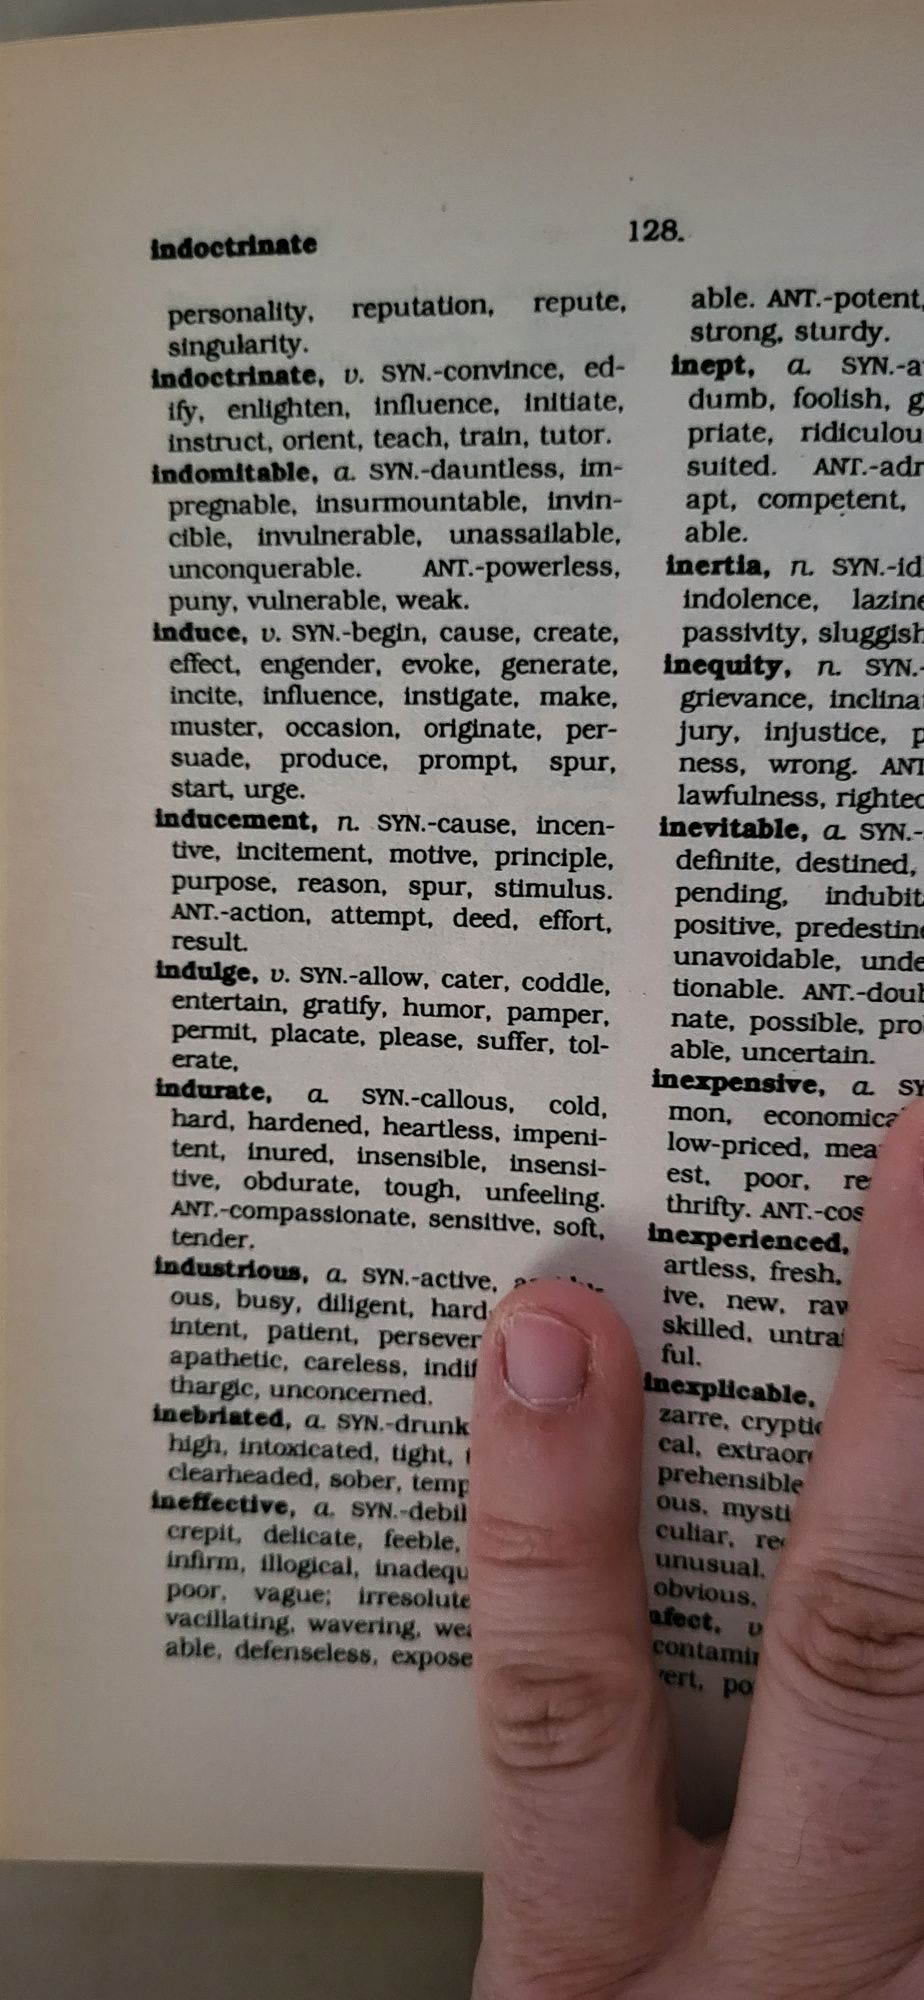 Webster's English Thesaurus